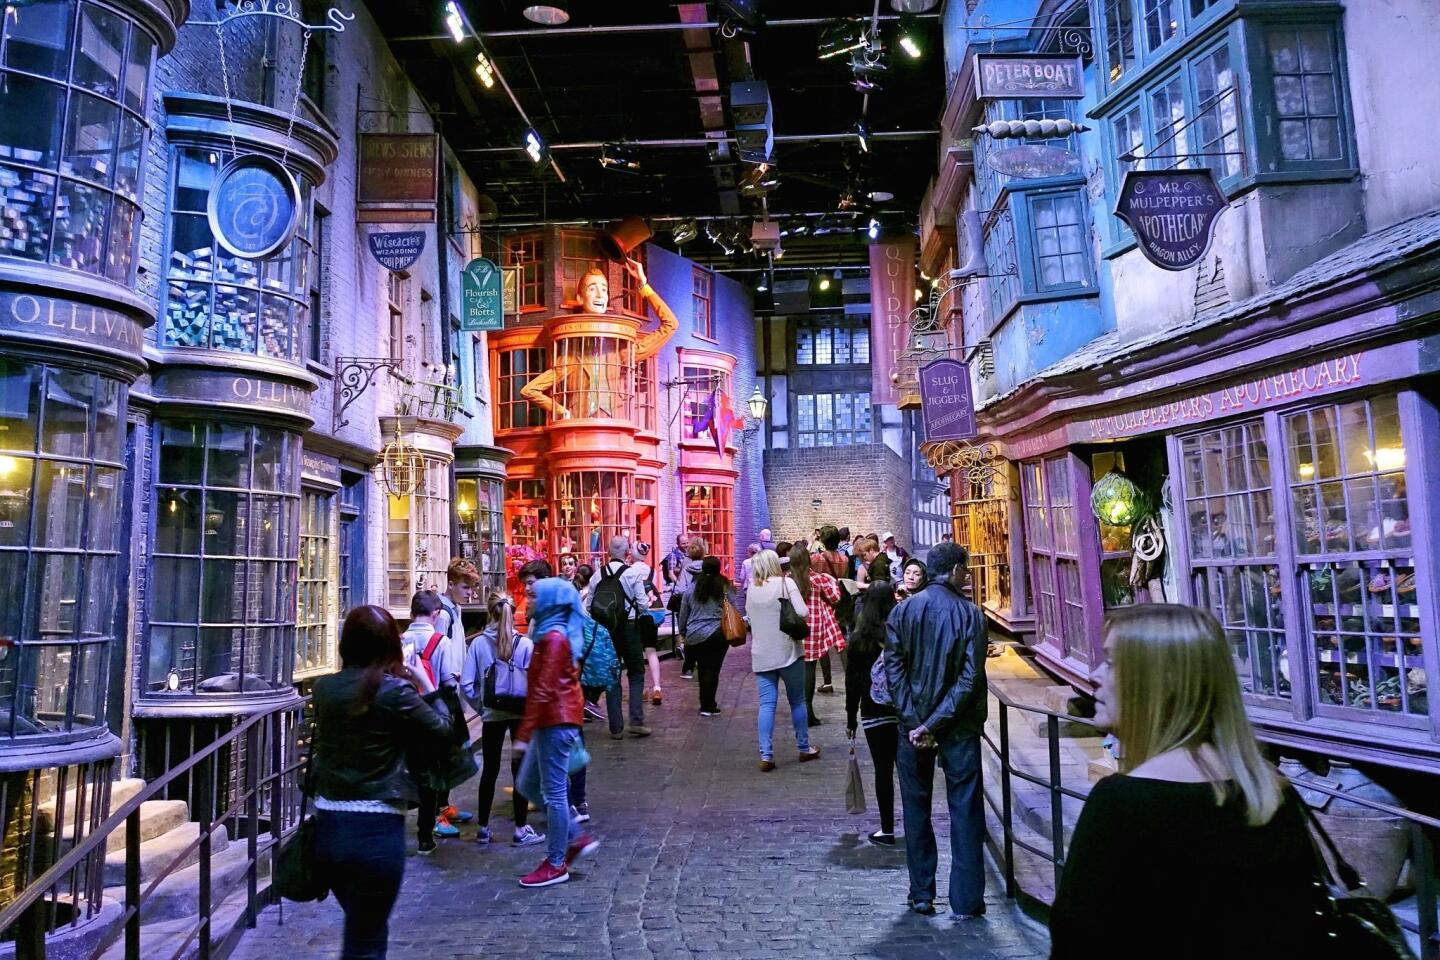 Tourists stroll along the Diagon Alley movie set at The Making of Harry Potter Warner Bros. Studios experience in London.